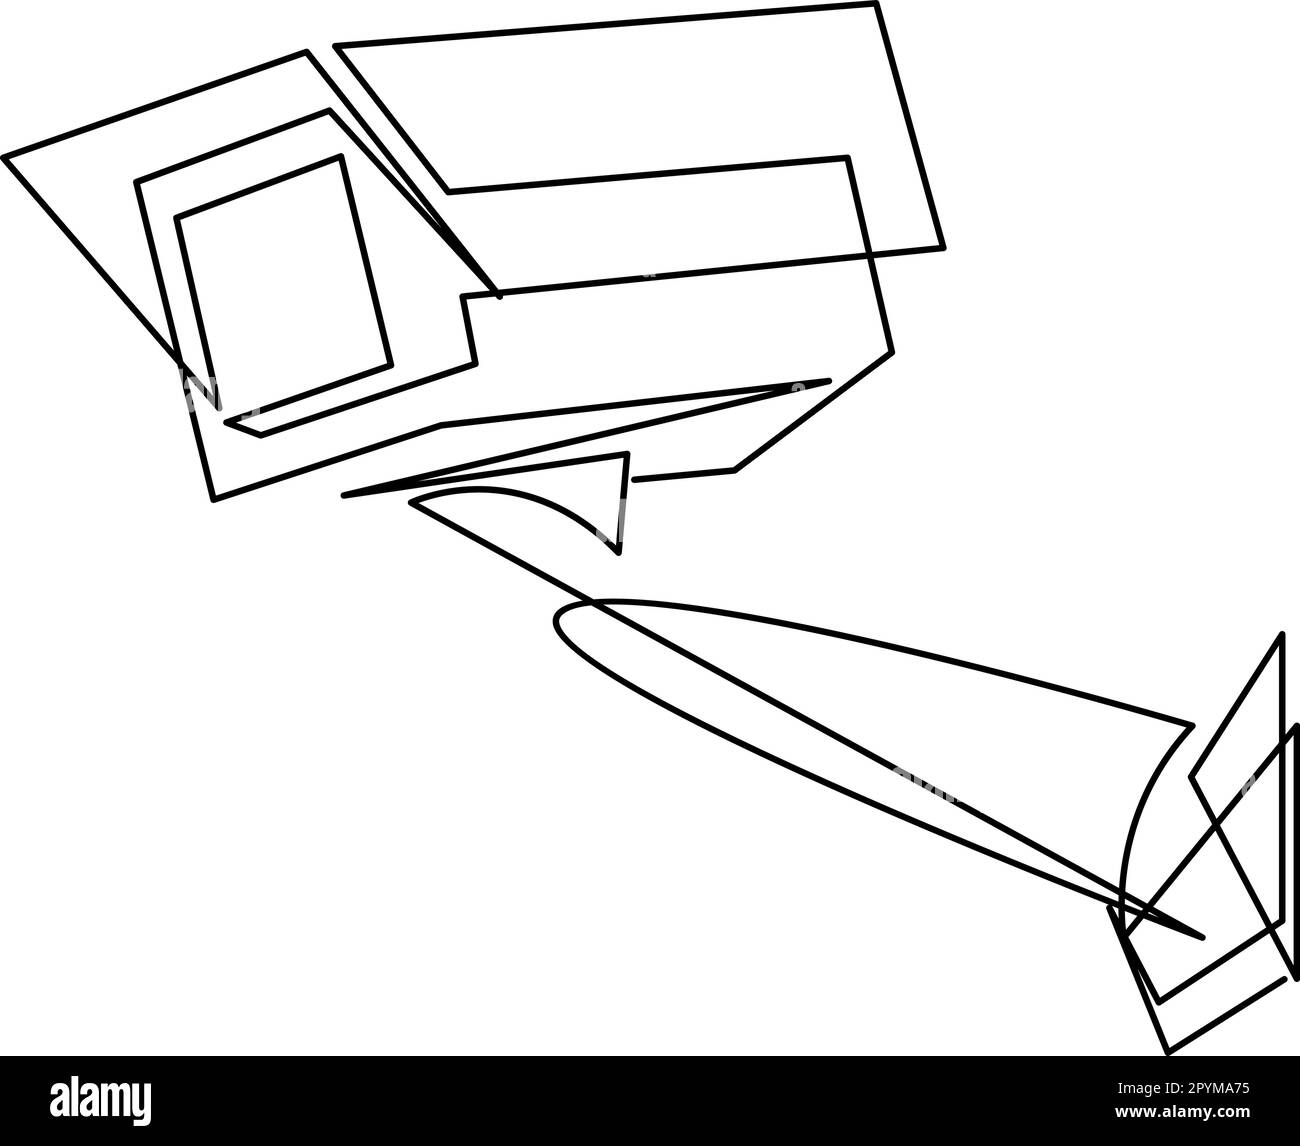 Continuous one line drawing of CCTV with a box shape installed on the side of the highway. Monitor traffic movements and improve security systems conc Stock Vector